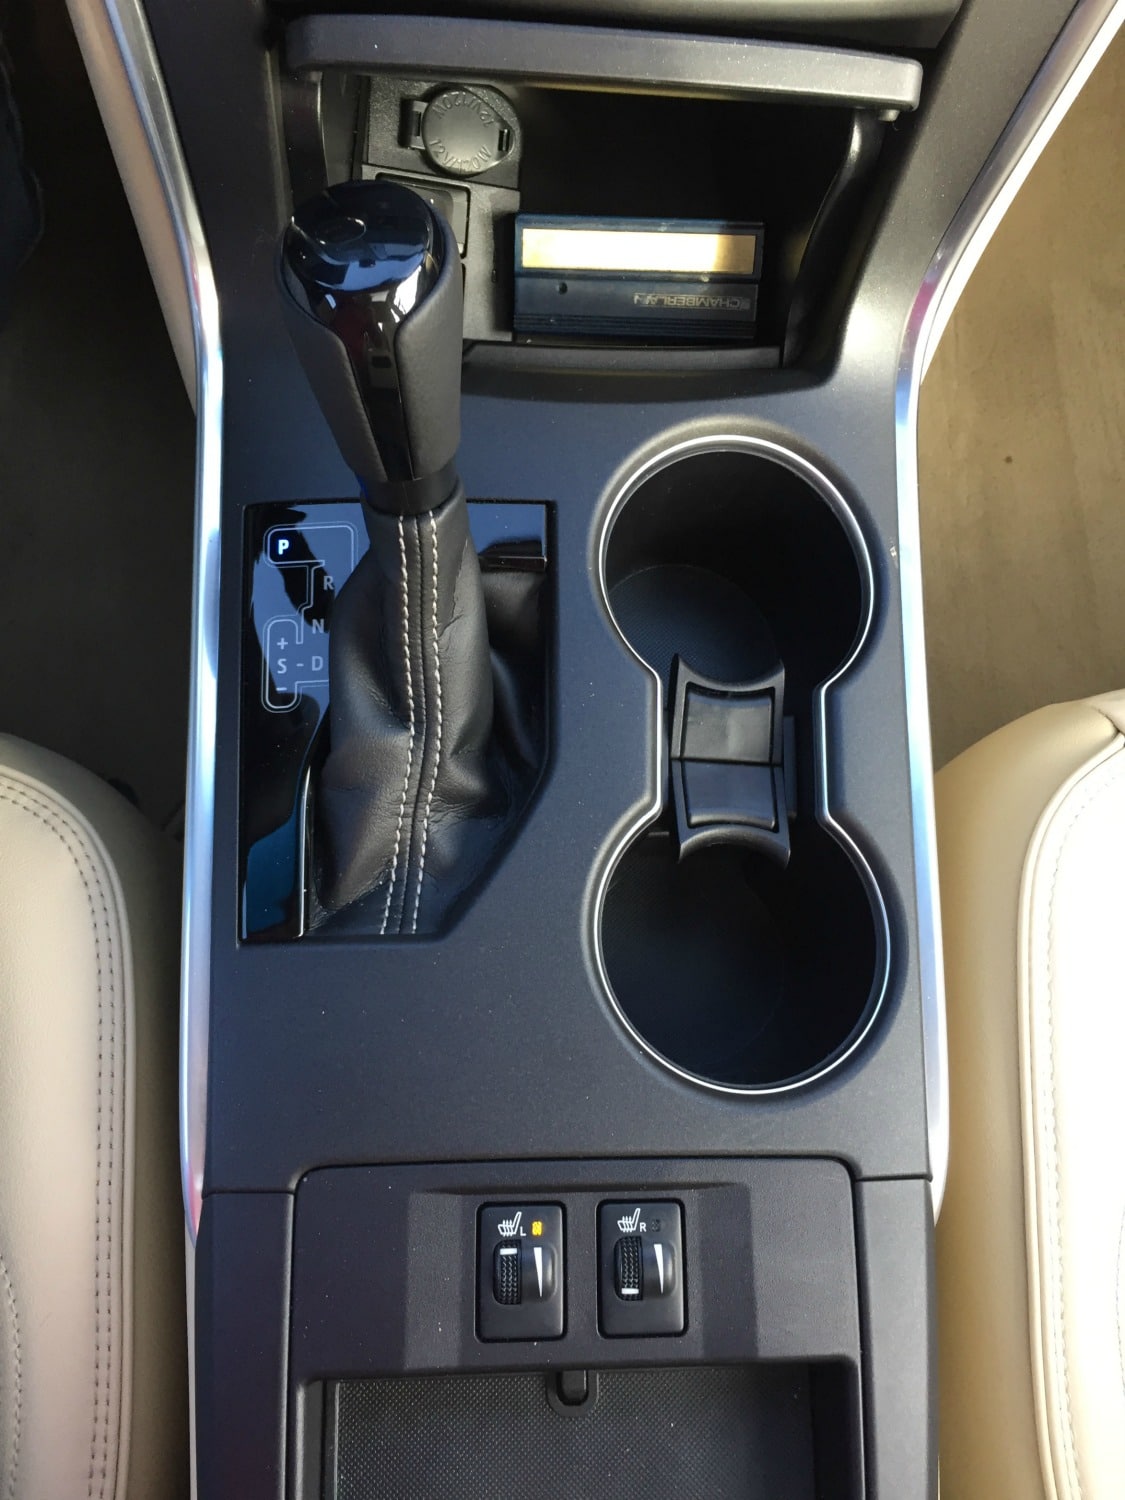 Camry console